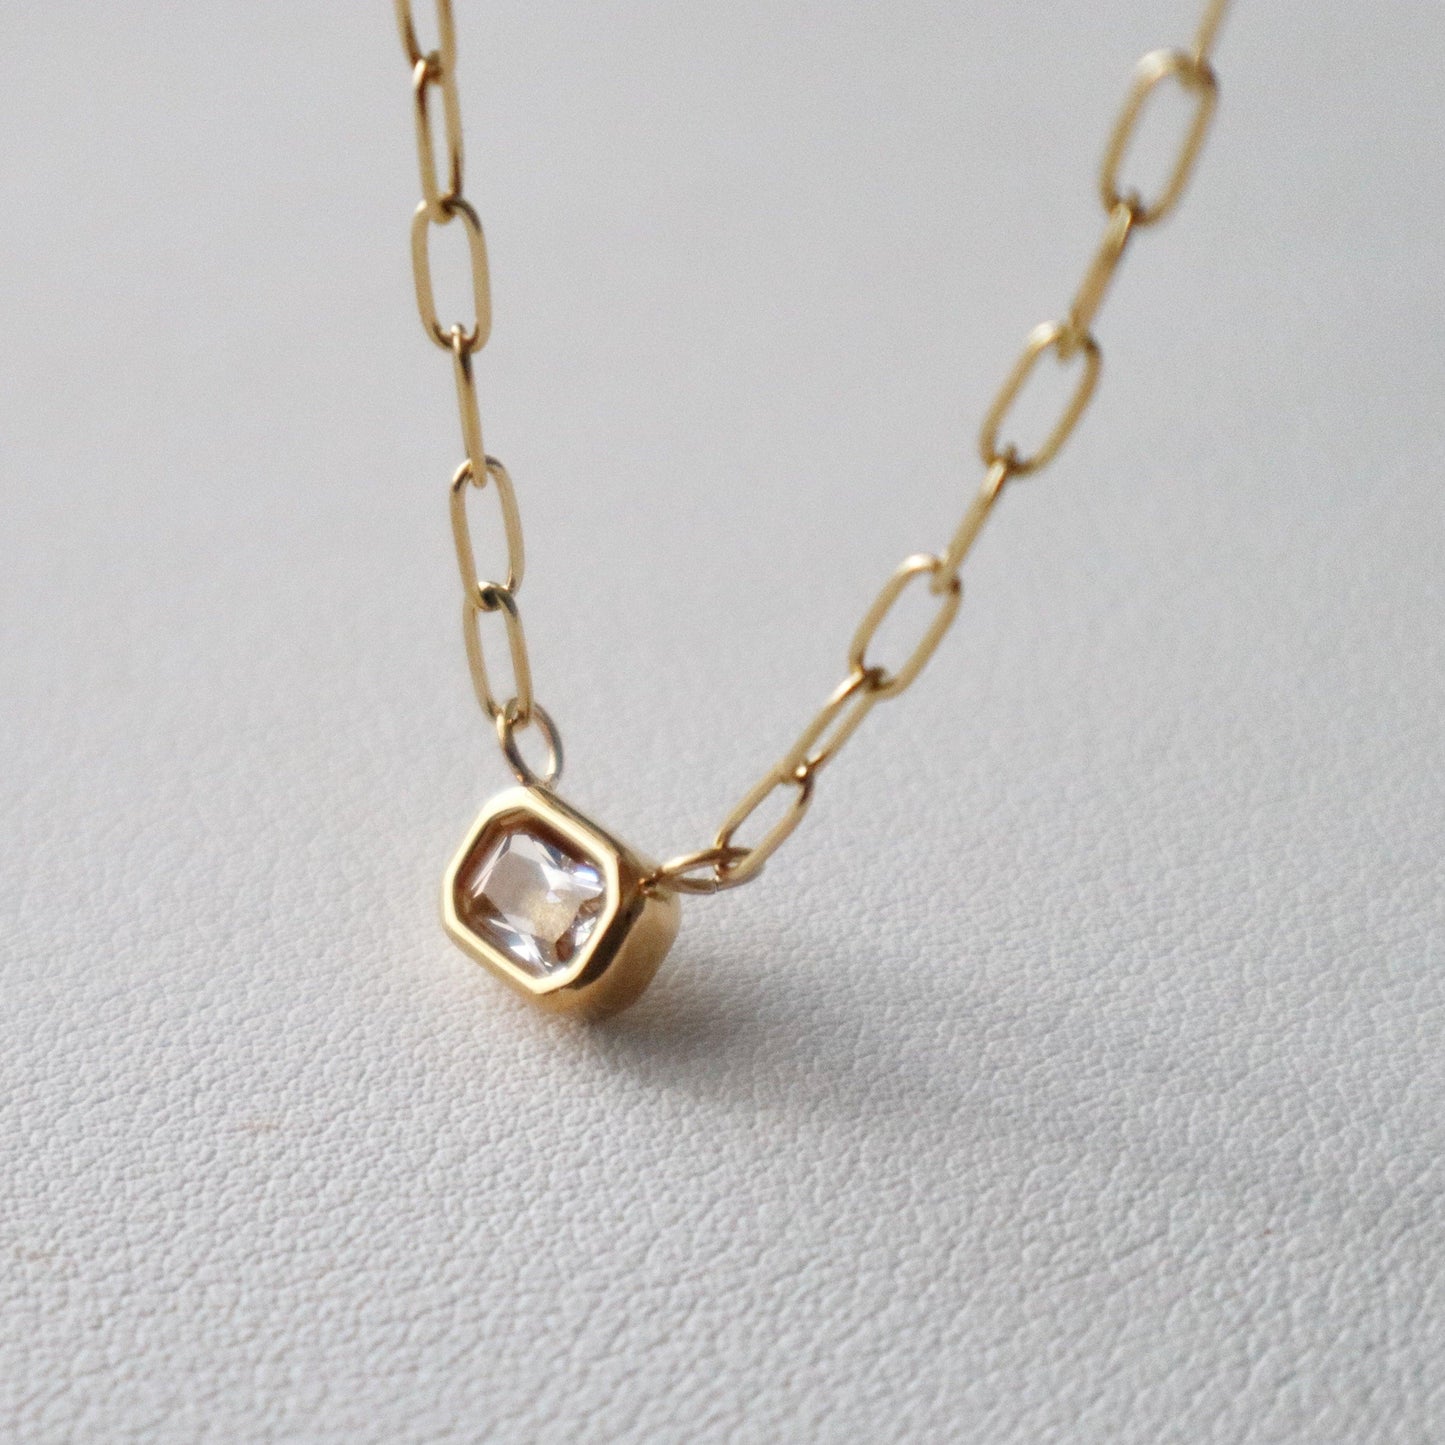 Rectangular Gem Necklace | Paperclip Pendant Necklace - JESSA JEWELRY | GOLD JEWELRY; dainty, affordable gold everyday jewelry. Tarnish free, water-resistant, hypoallergenic. Jewelry for everyday wear